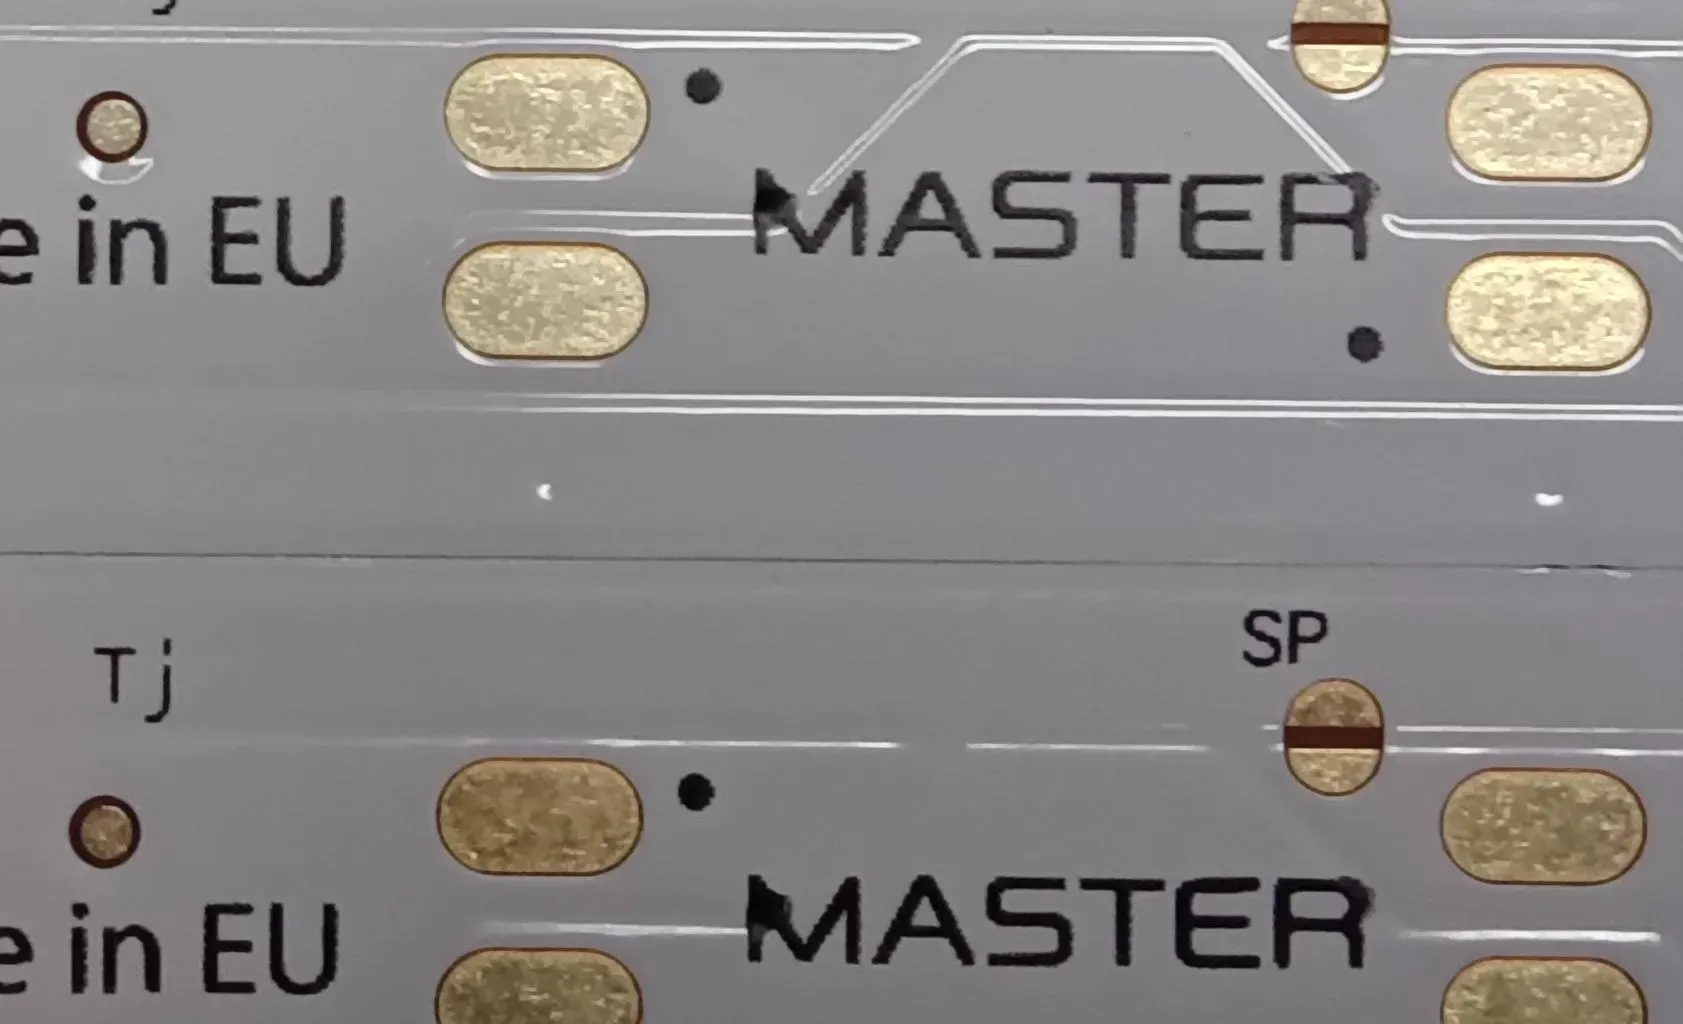 Gold treatet surface of FCBs for MASTER LED strips to prevent corrosion